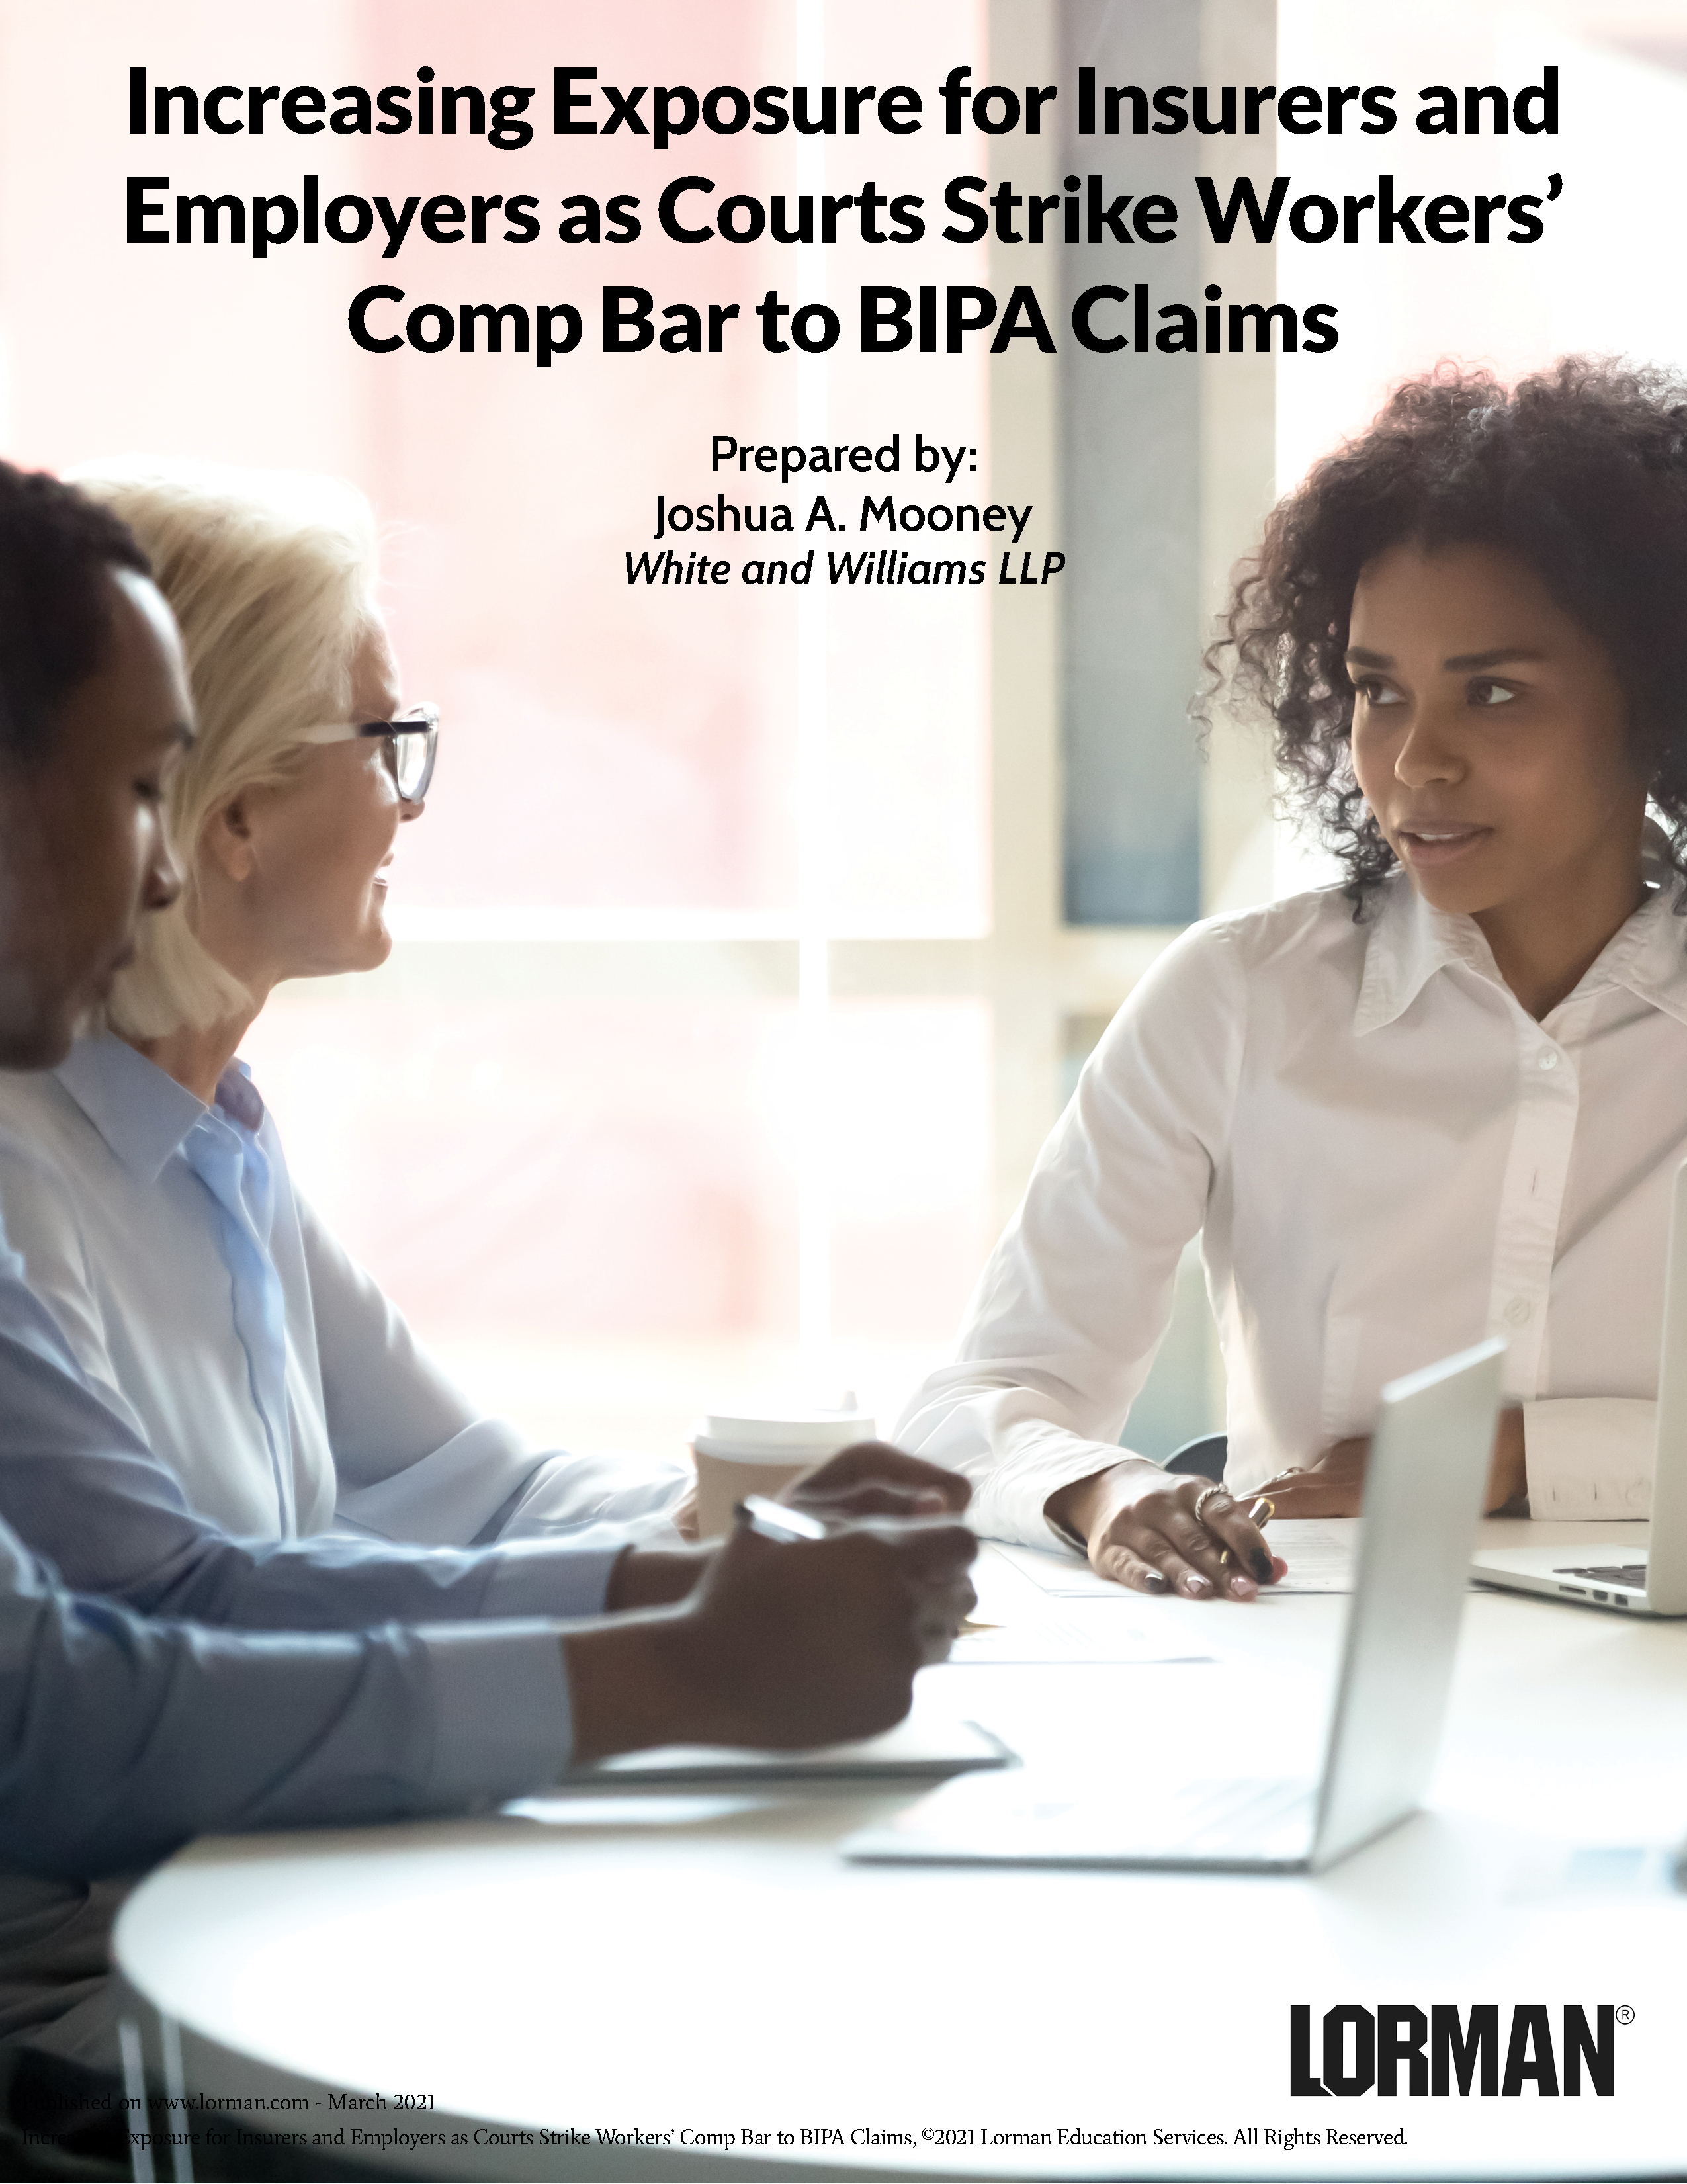 Increasing Exposure for Insurers and Employers as Courts Strike Workers' Comp Bar to BIPA Claims